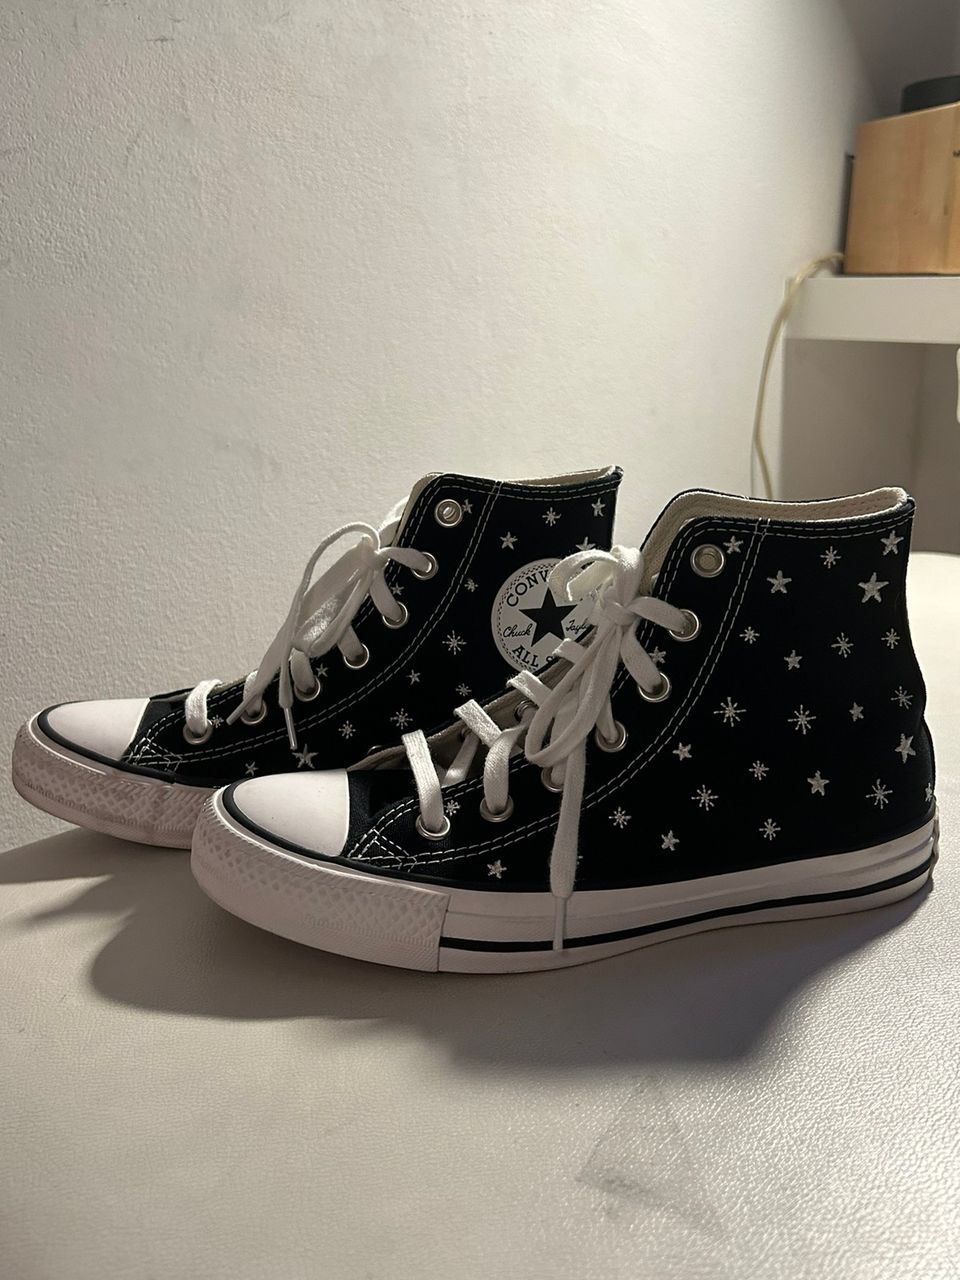 Converse embroidered star